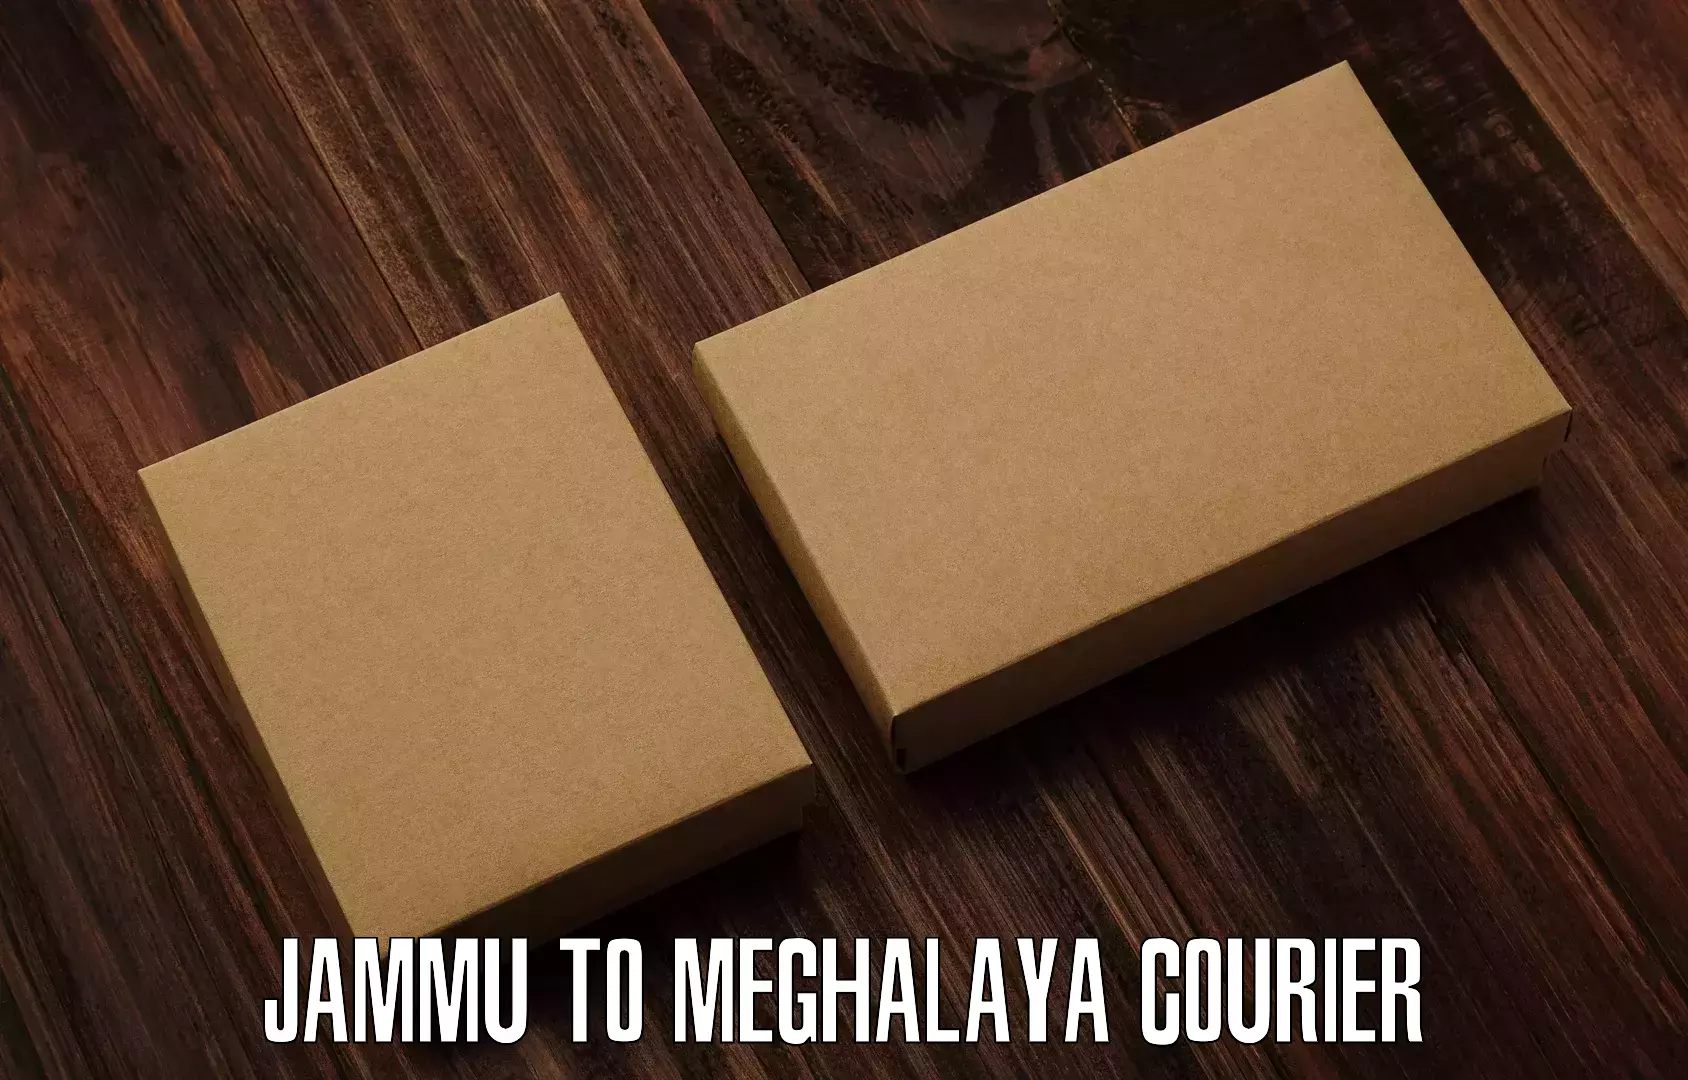 Same-day delivery solutions Jammu to Meghalaya